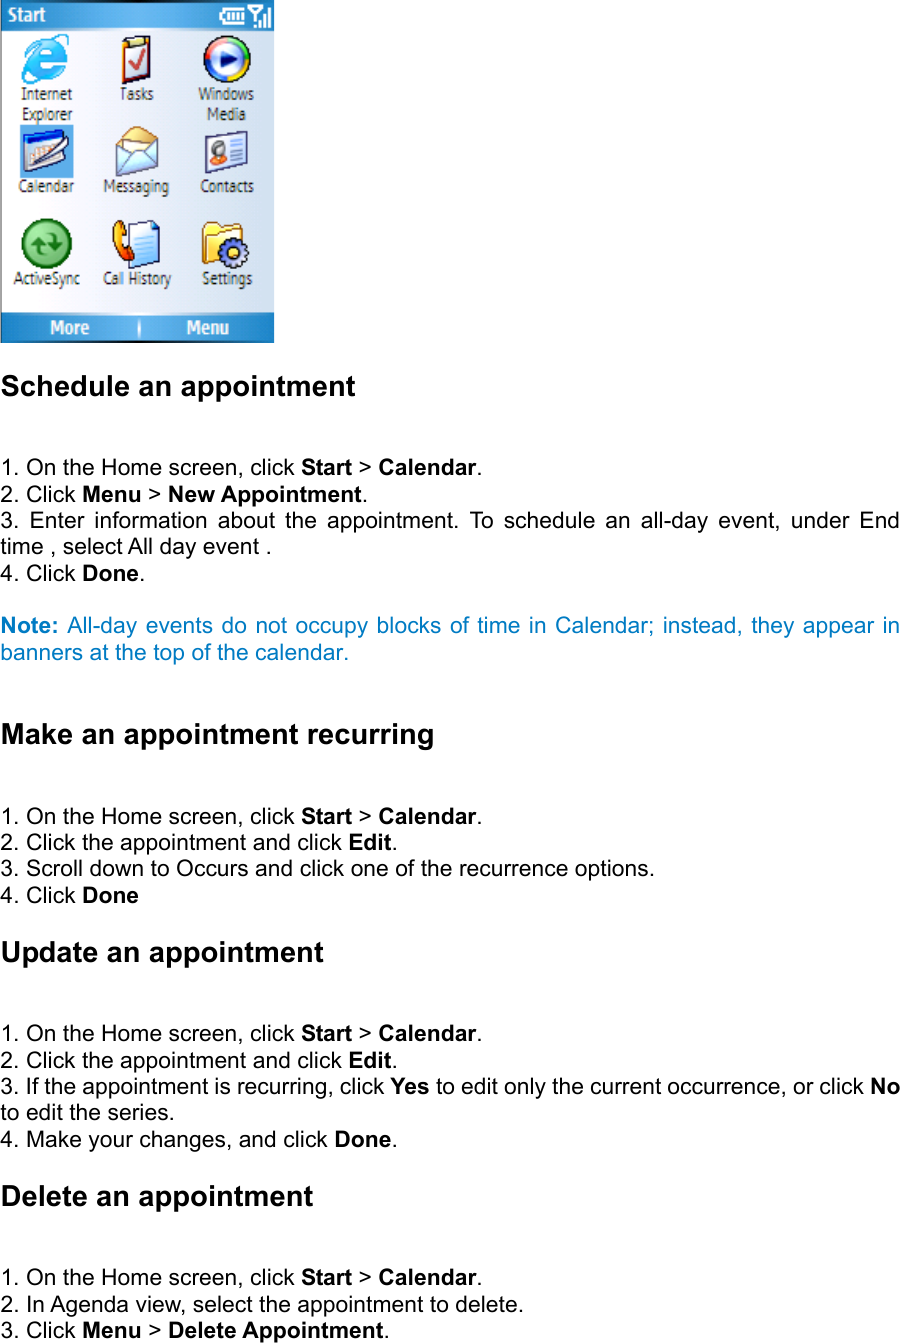  Schedule an appointment   1. On the Home screen, click Start &gt; Calendar.  2. Click Menu &gt; New Appointment.  3. Enter information about the appointment. To schedule an all-day event, under End time , select All day event .   4. Click Done.   Note: All-day events do not occupy blocks of time in Calendar; instead, they appear in banners at the top of the calendar.  Make an appointment recurring   1. On the Home screen, click Start &gt; Calendar.  2. Click the appointment and click Edit.  3. Scroll down to Occurs and click one of the recurrence options.   4. Click Done Update an appointment   1. On the Home screen, click Start &gt; Calendar.  2. Click the appointment and click Edit.  3. If the appointment is recurring, click Yes to edit only the current occurrence, or click No to edit the series.   4. Make your changes, and click Done. Delete an appointment   1. On the Home screen, click Start &gt; Calendar.  2. In Agenda view, select the appointment to delete.   3. Click Menu &gt; Delete Appointment.  